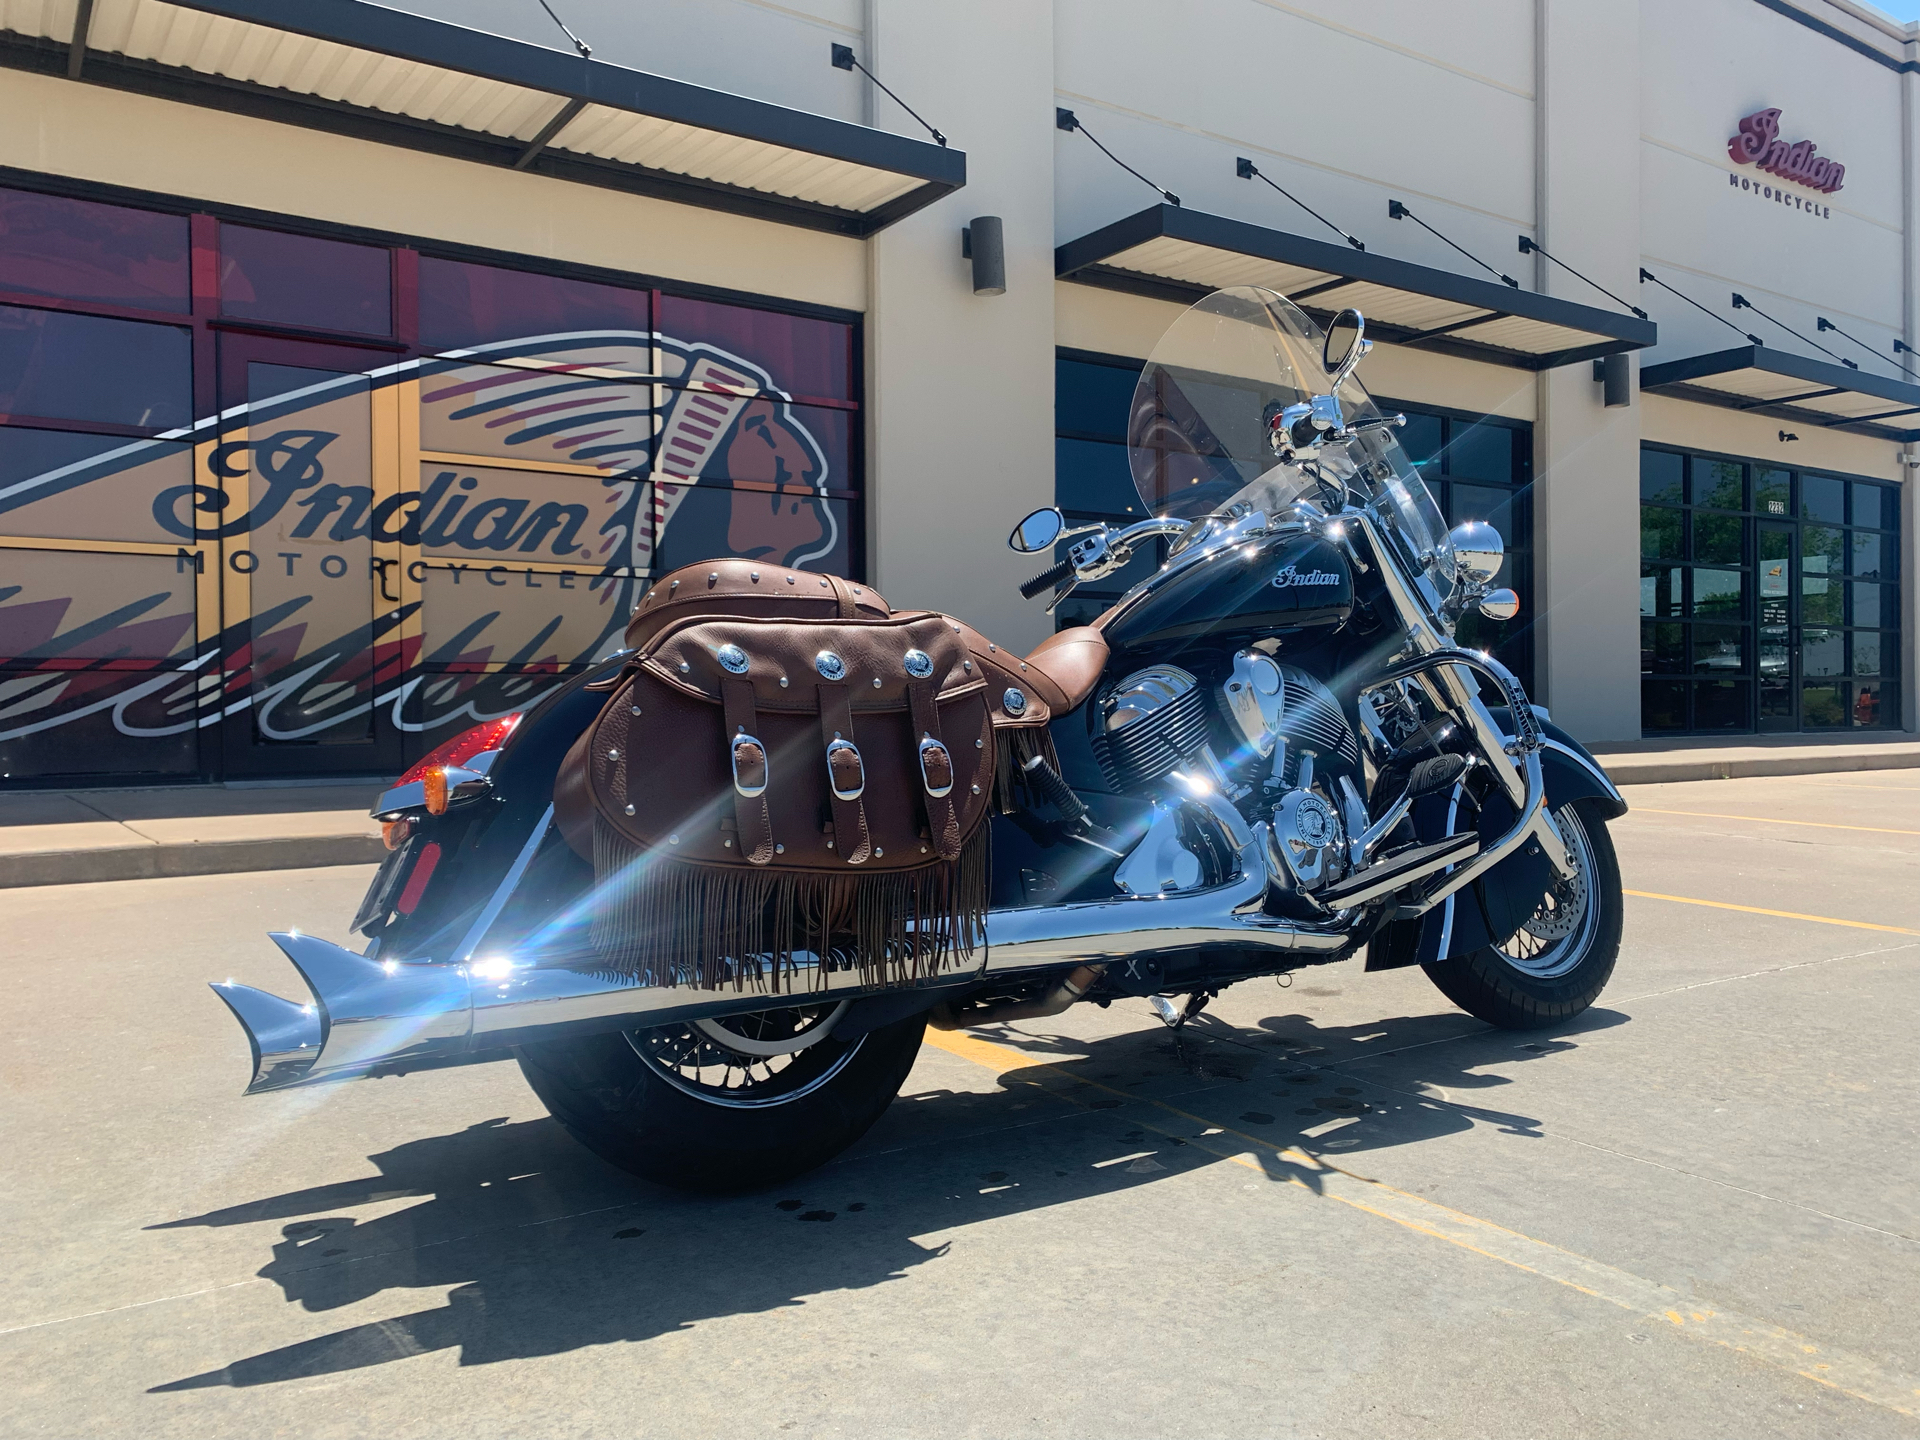 2016 Indian Chief® Vintage in Norman, Oklahoma - Photo 8